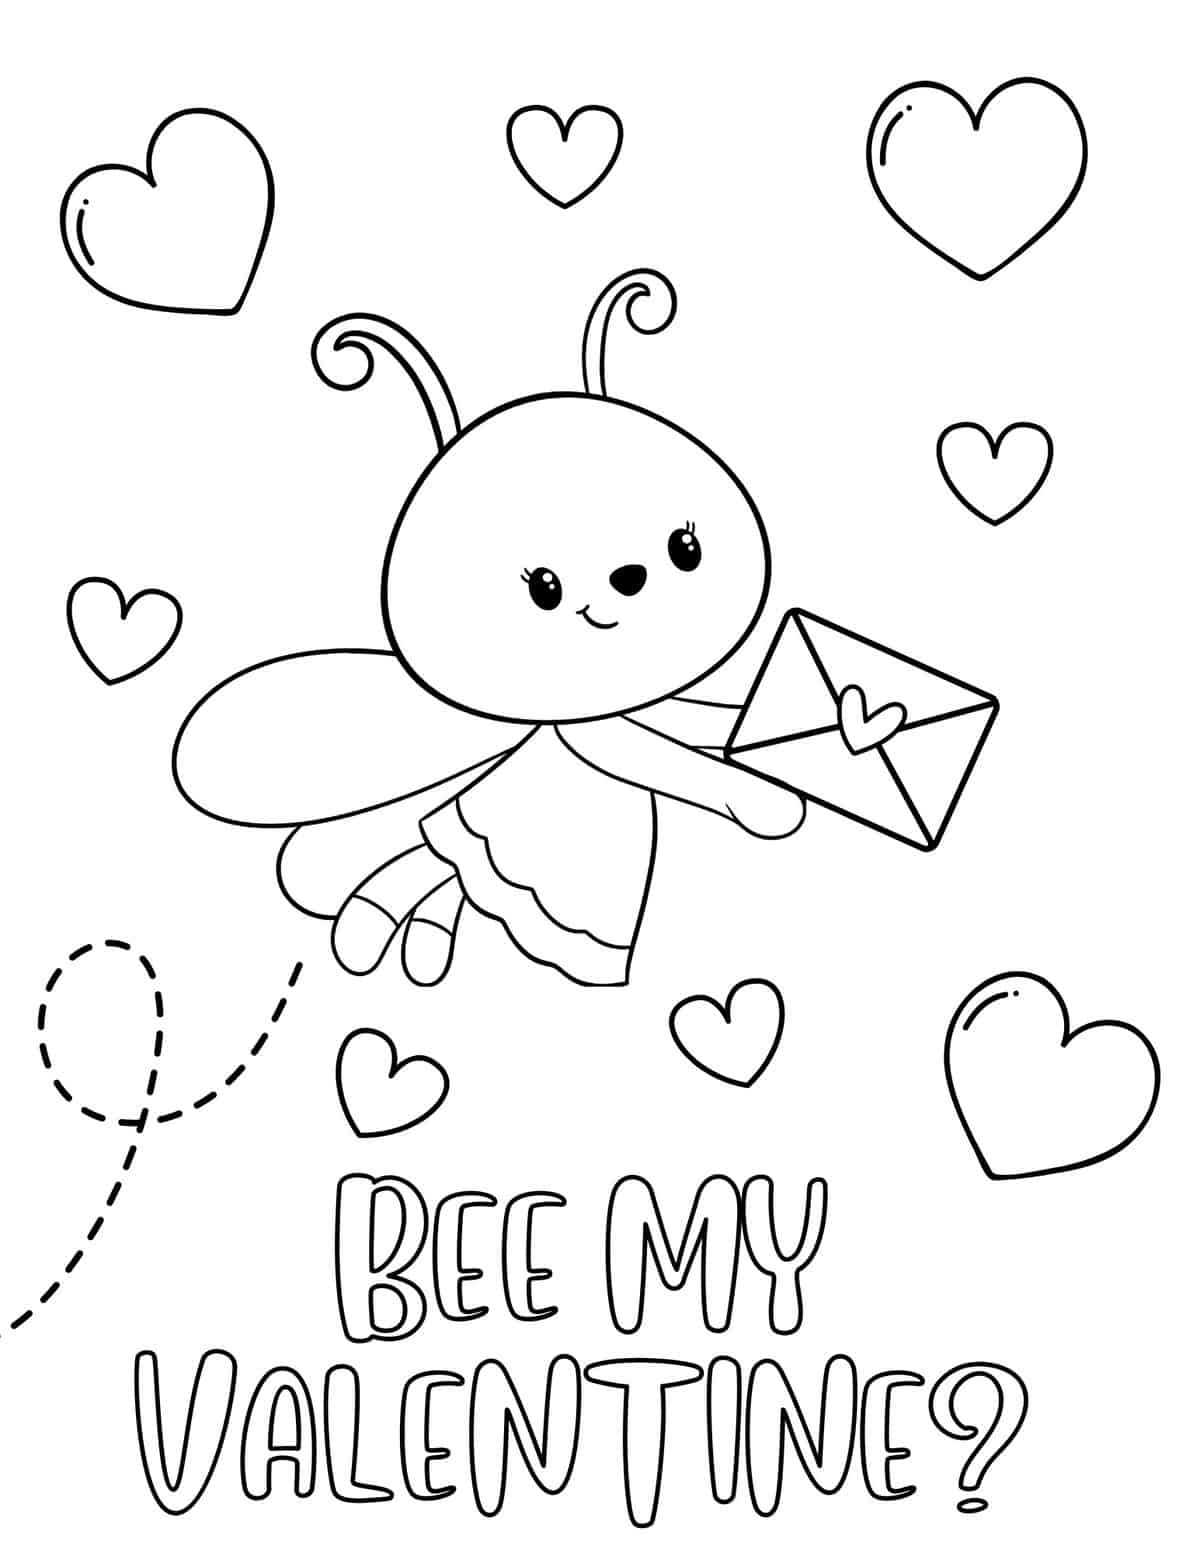 Free valentine coloring pages for kids